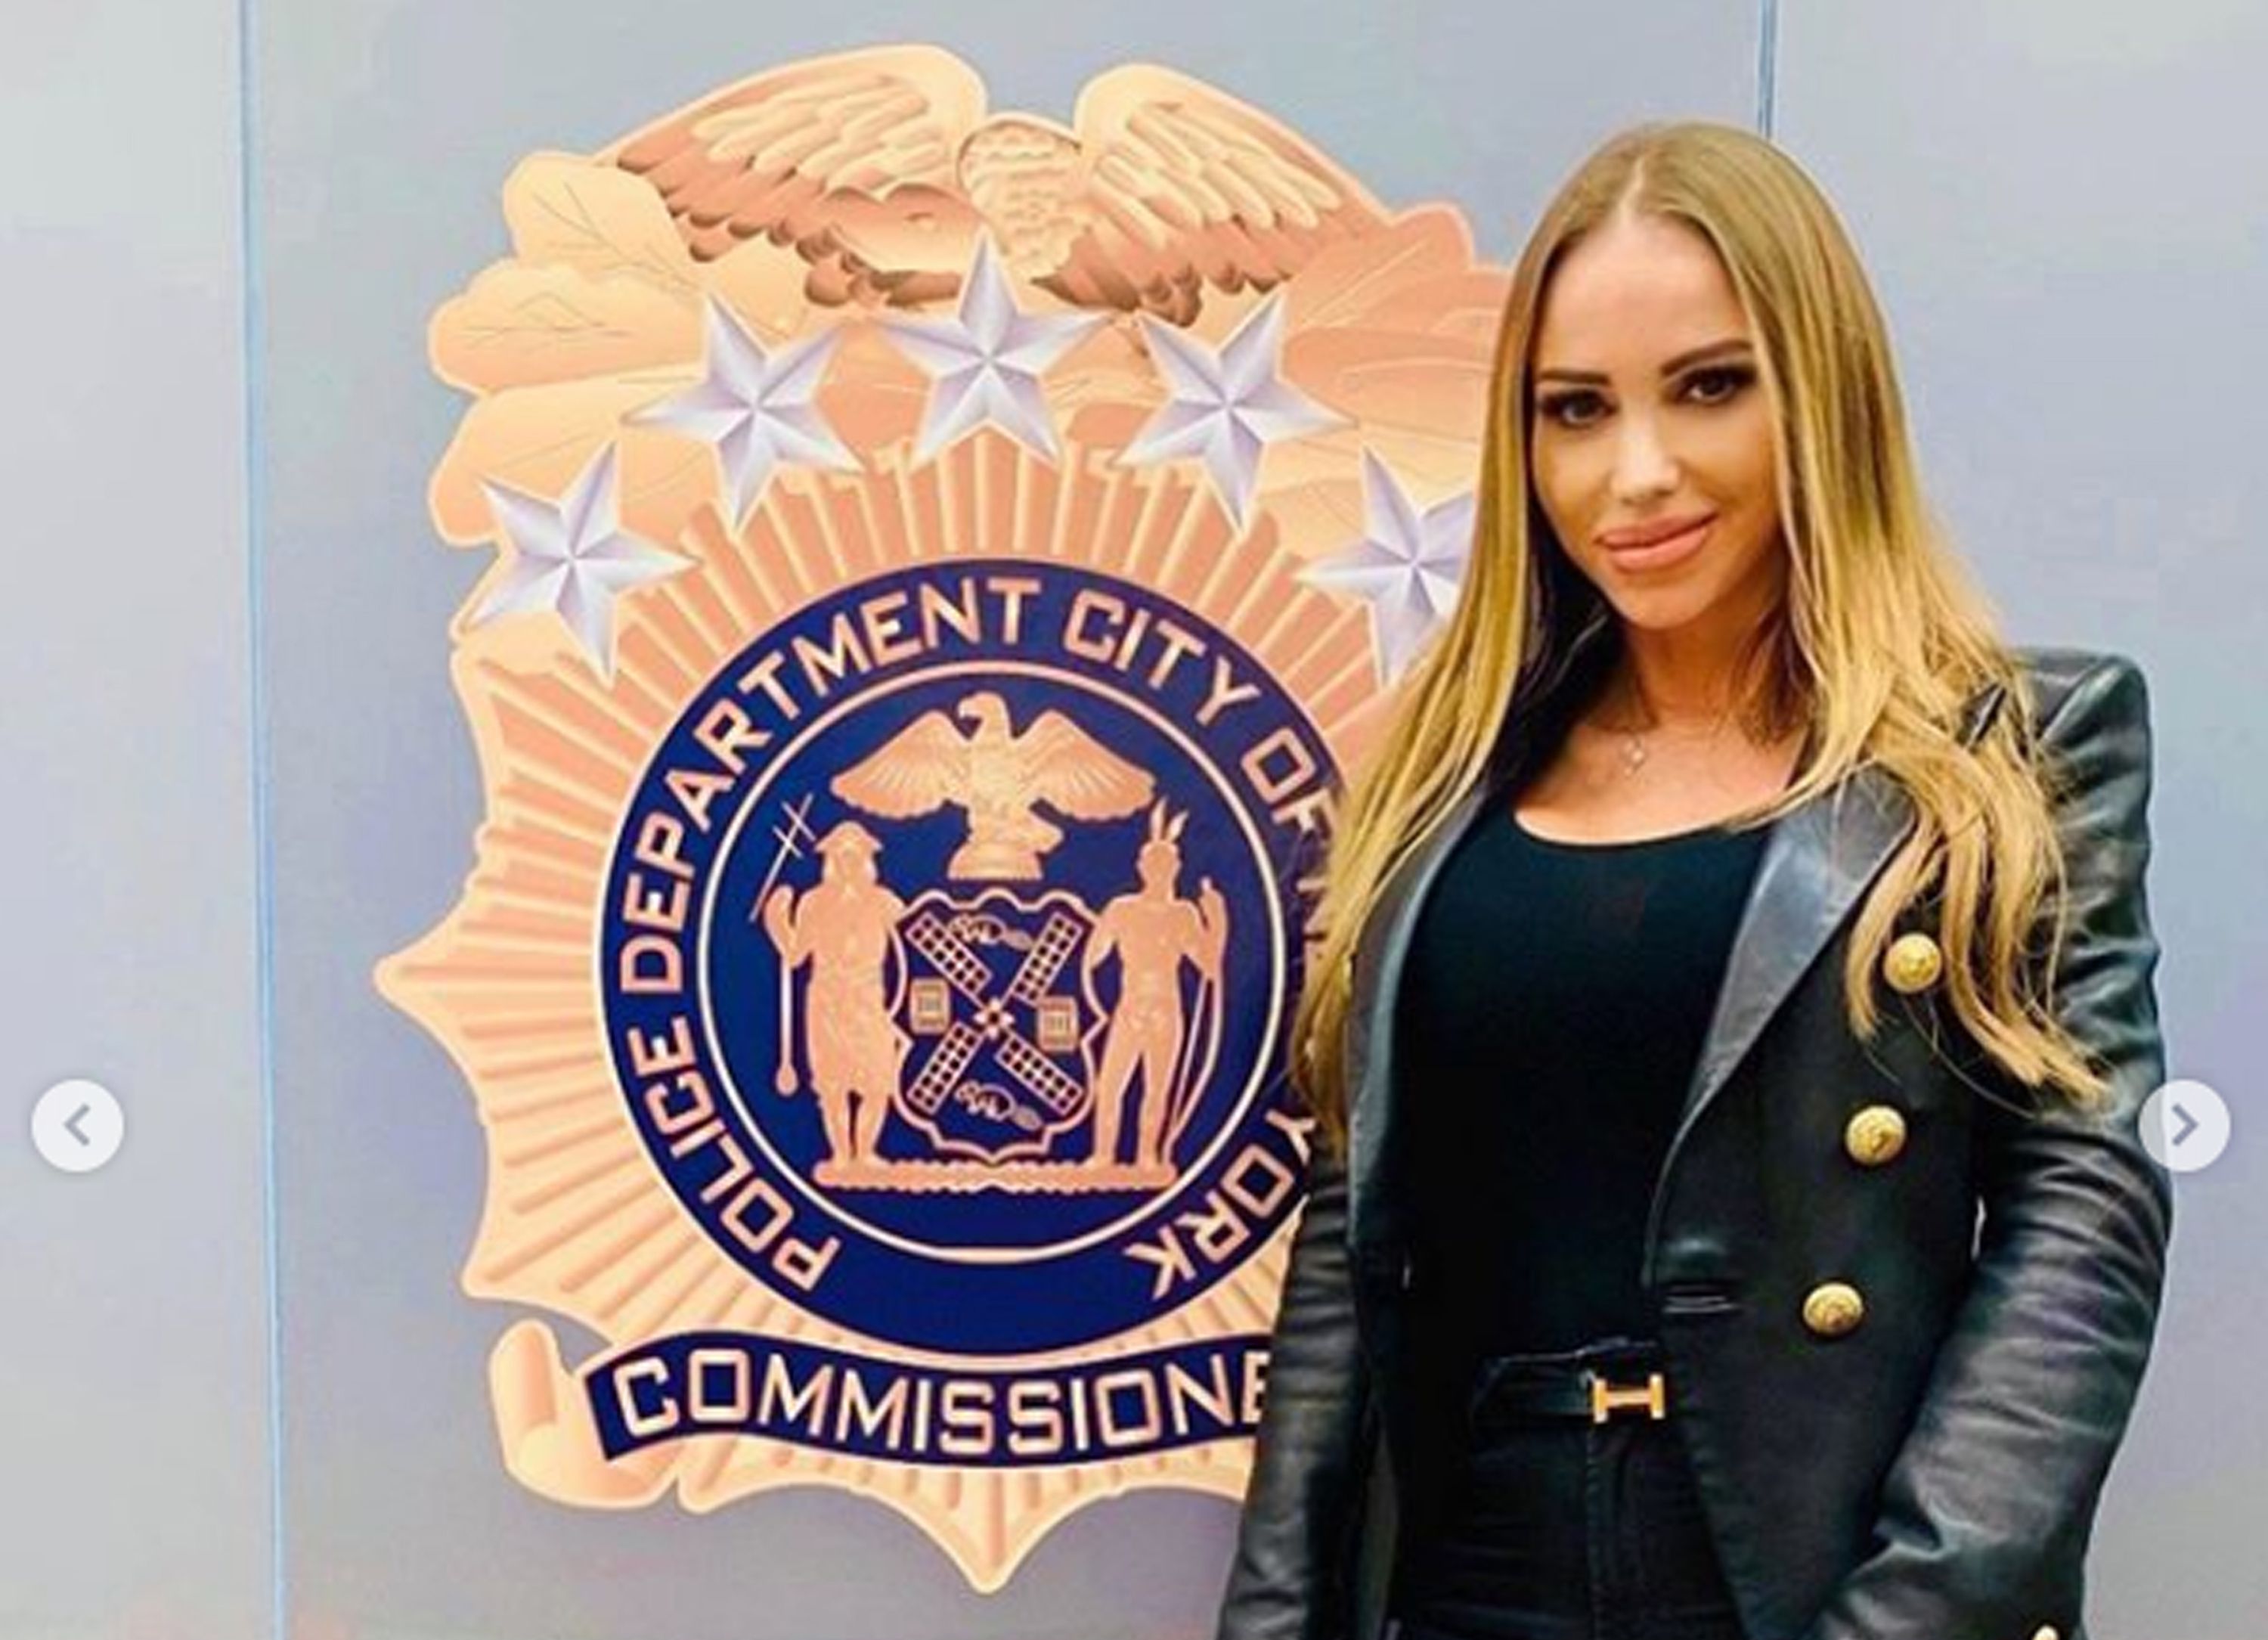 Vintage German Porn Stars Women - German porn star apologizes on Instagram for controversial NYPD  headquarters visit